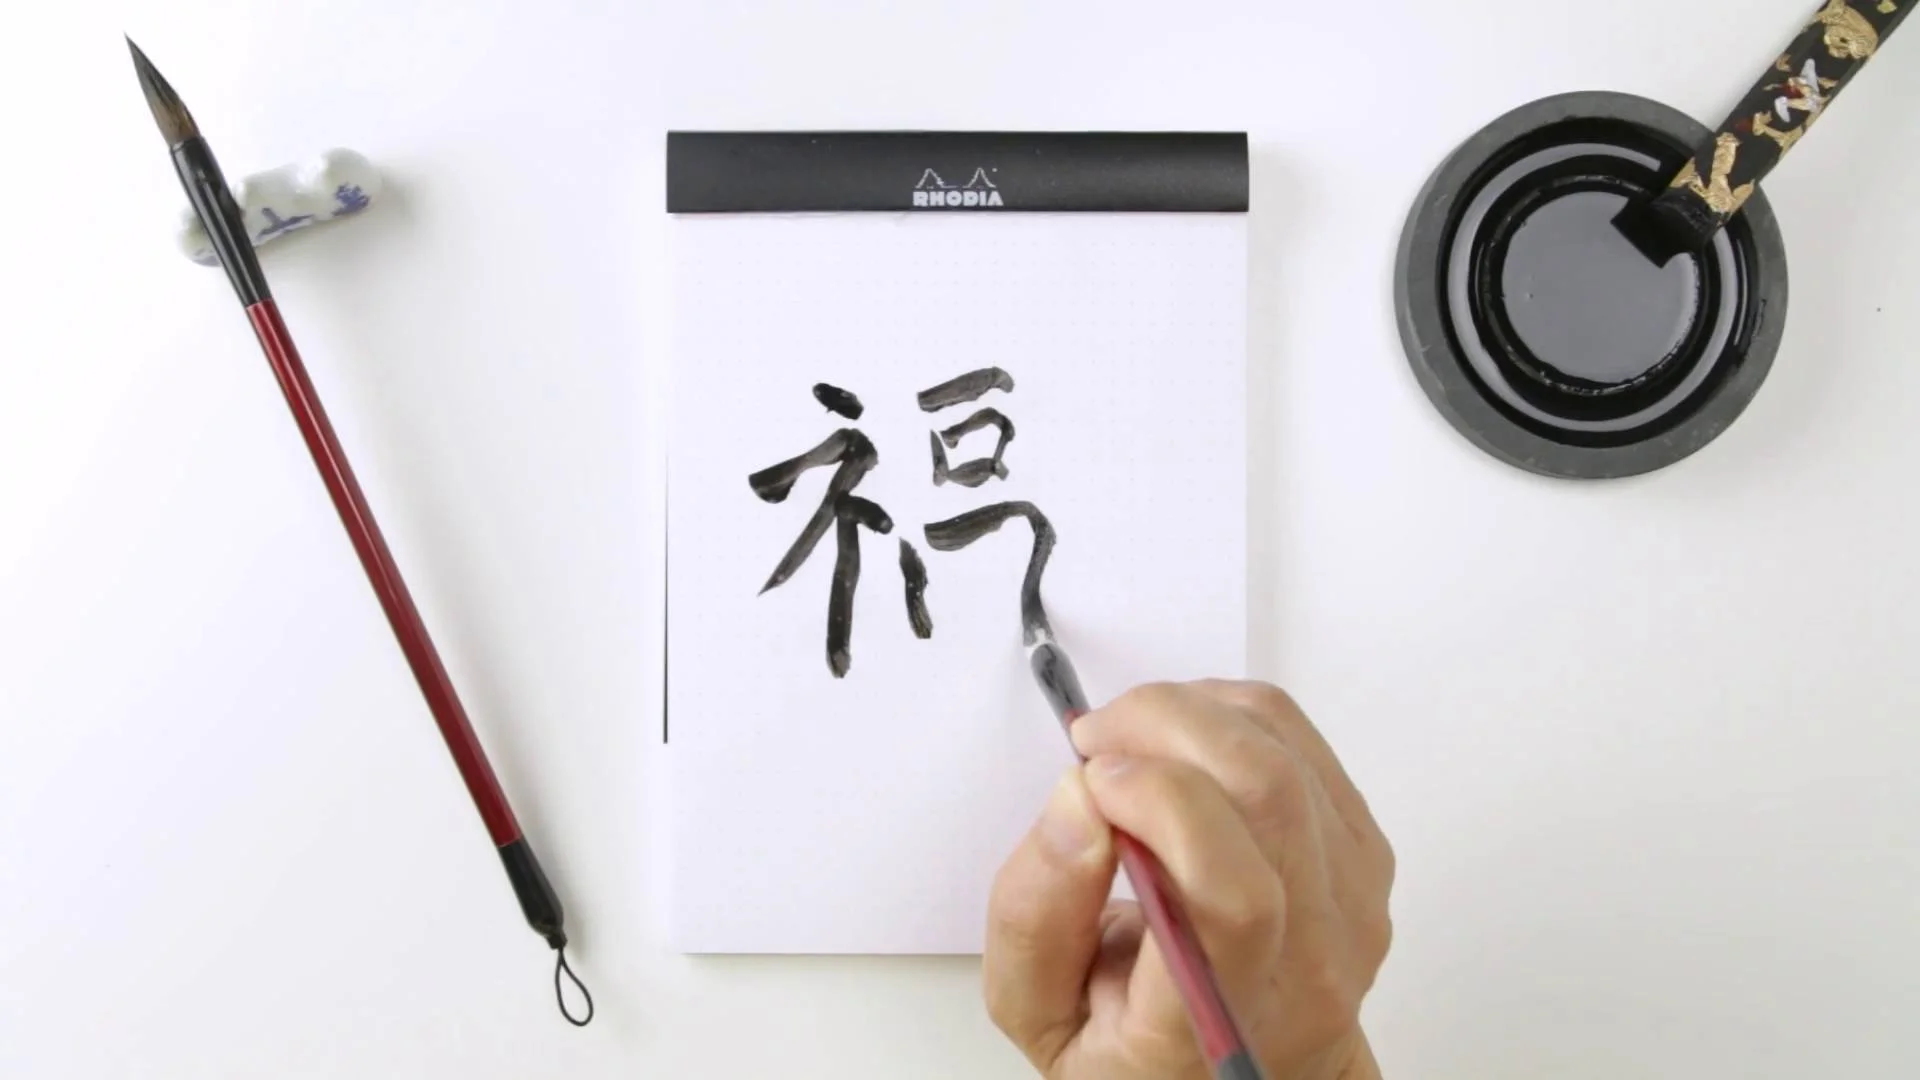 Chinese Calligraphy: History & Technique